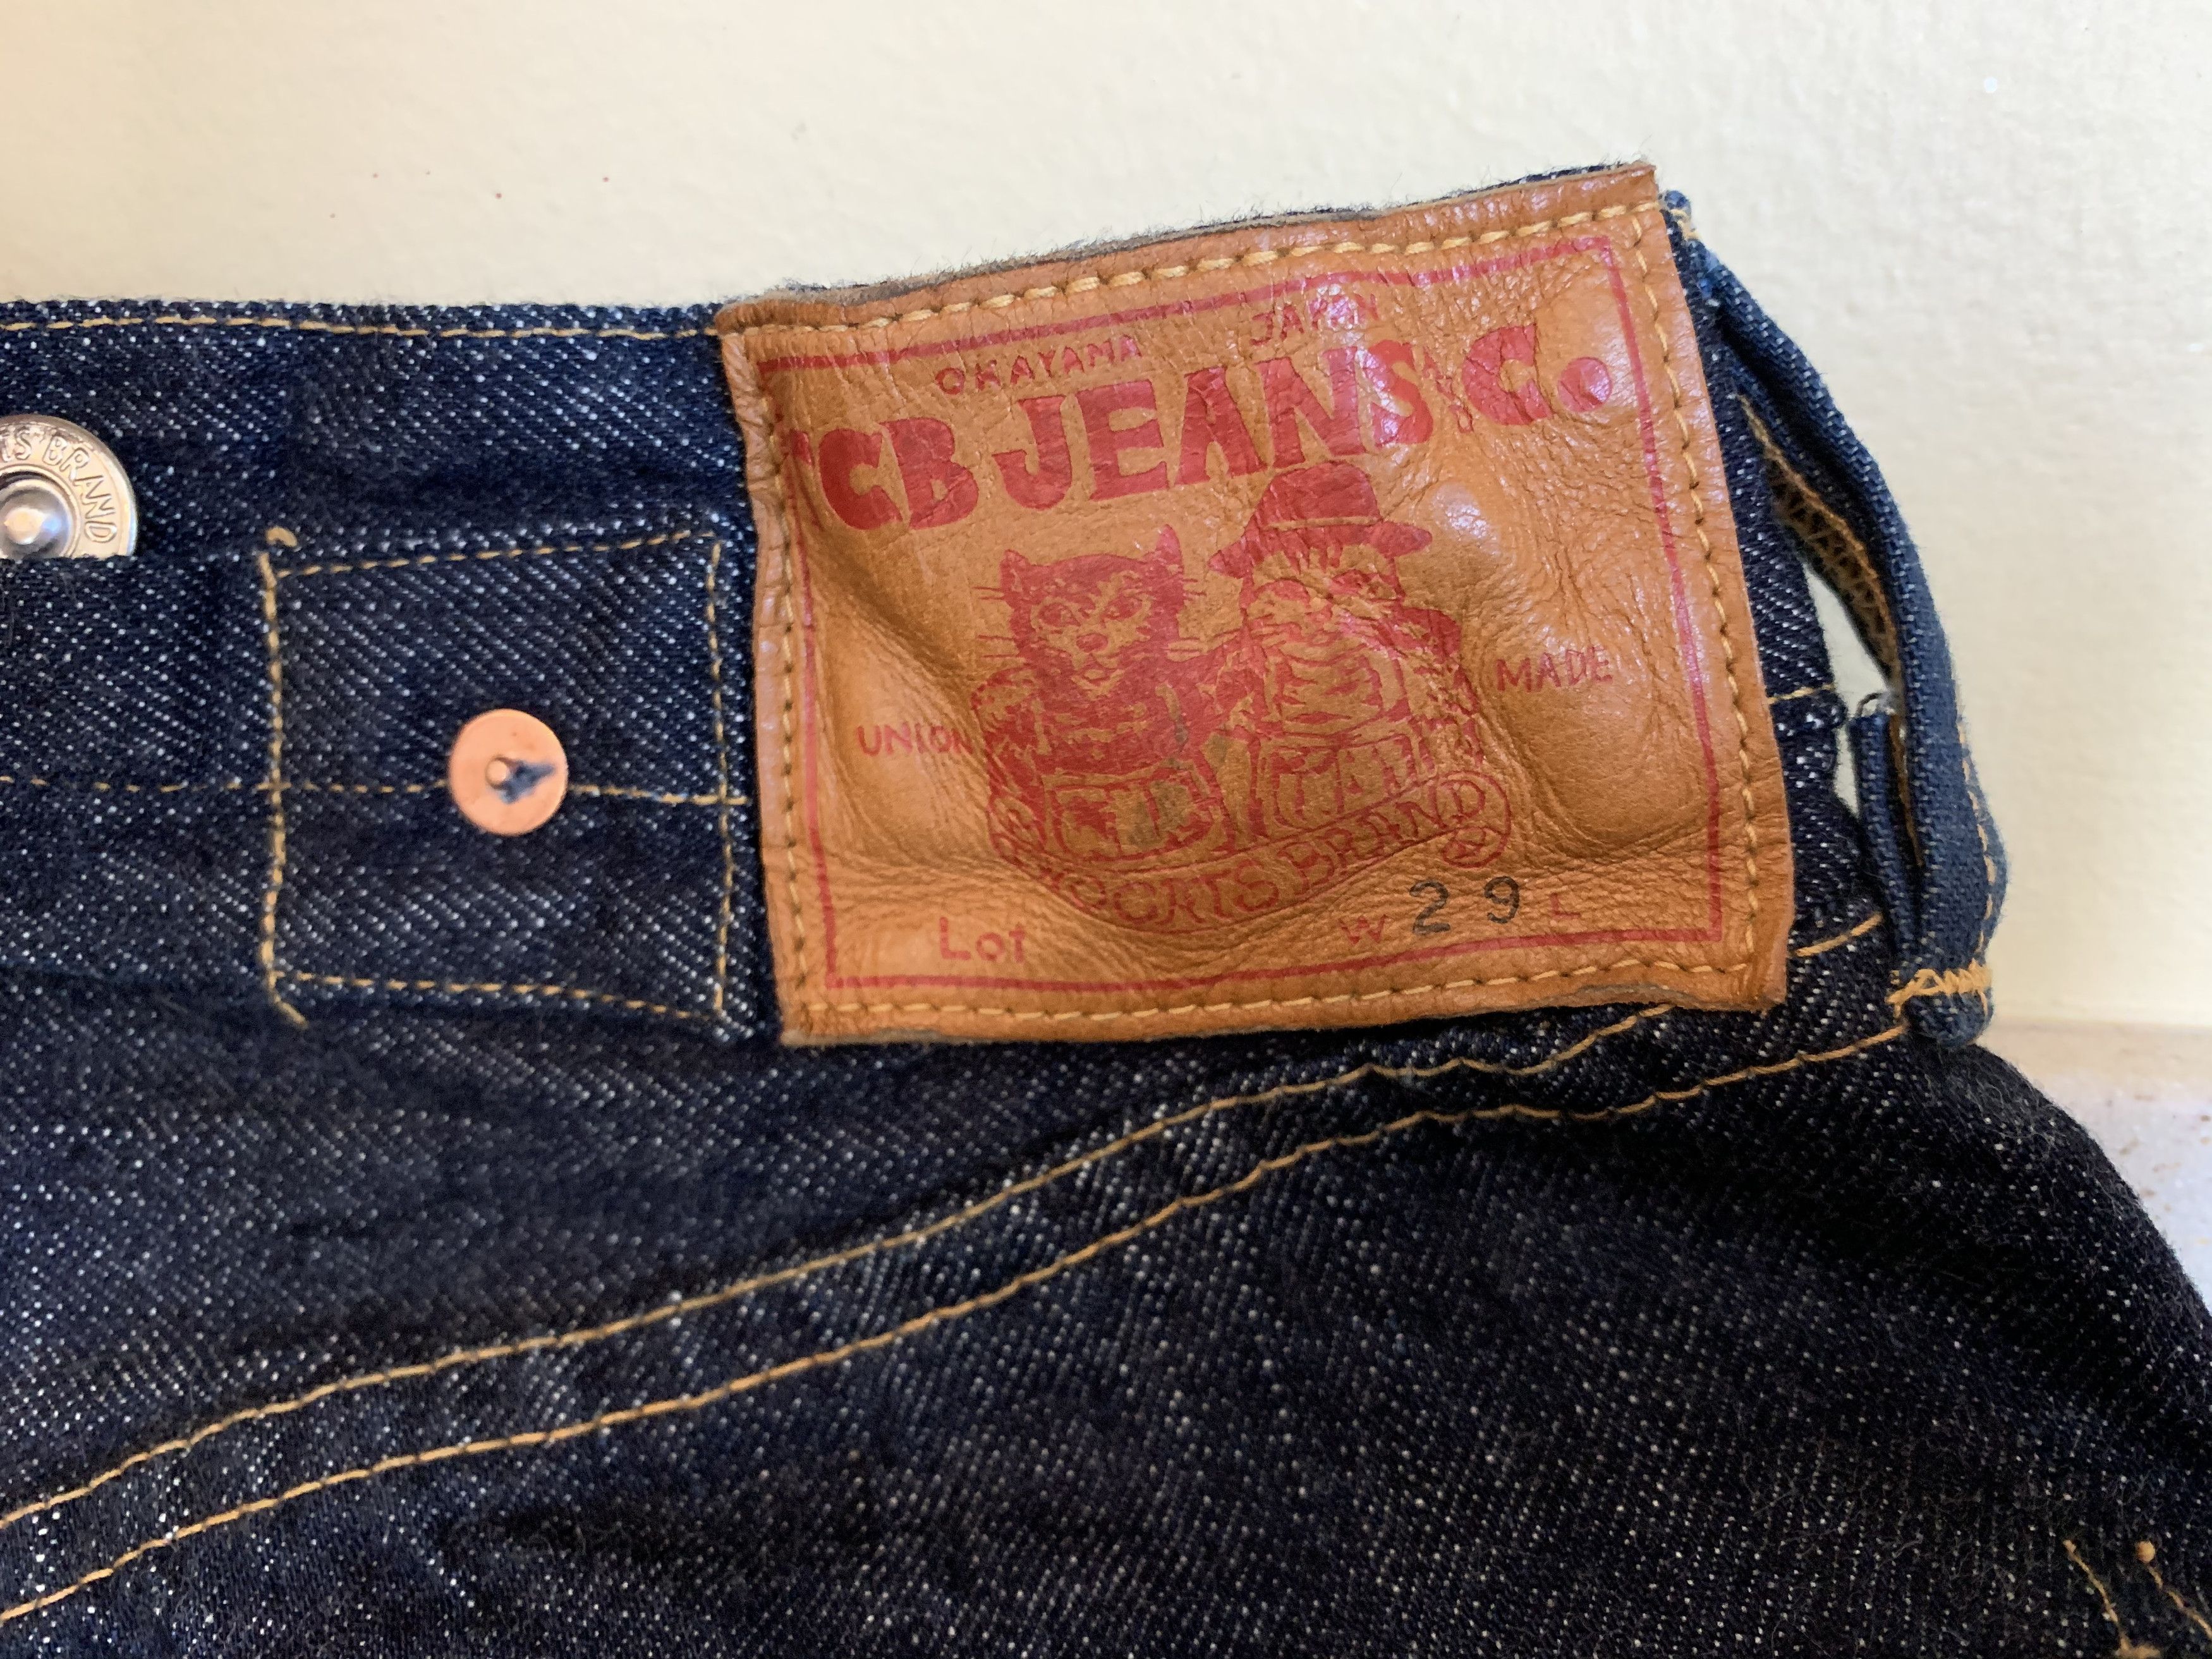 Tcb Jeans TCB 20s Size US 29 - 5 Preview